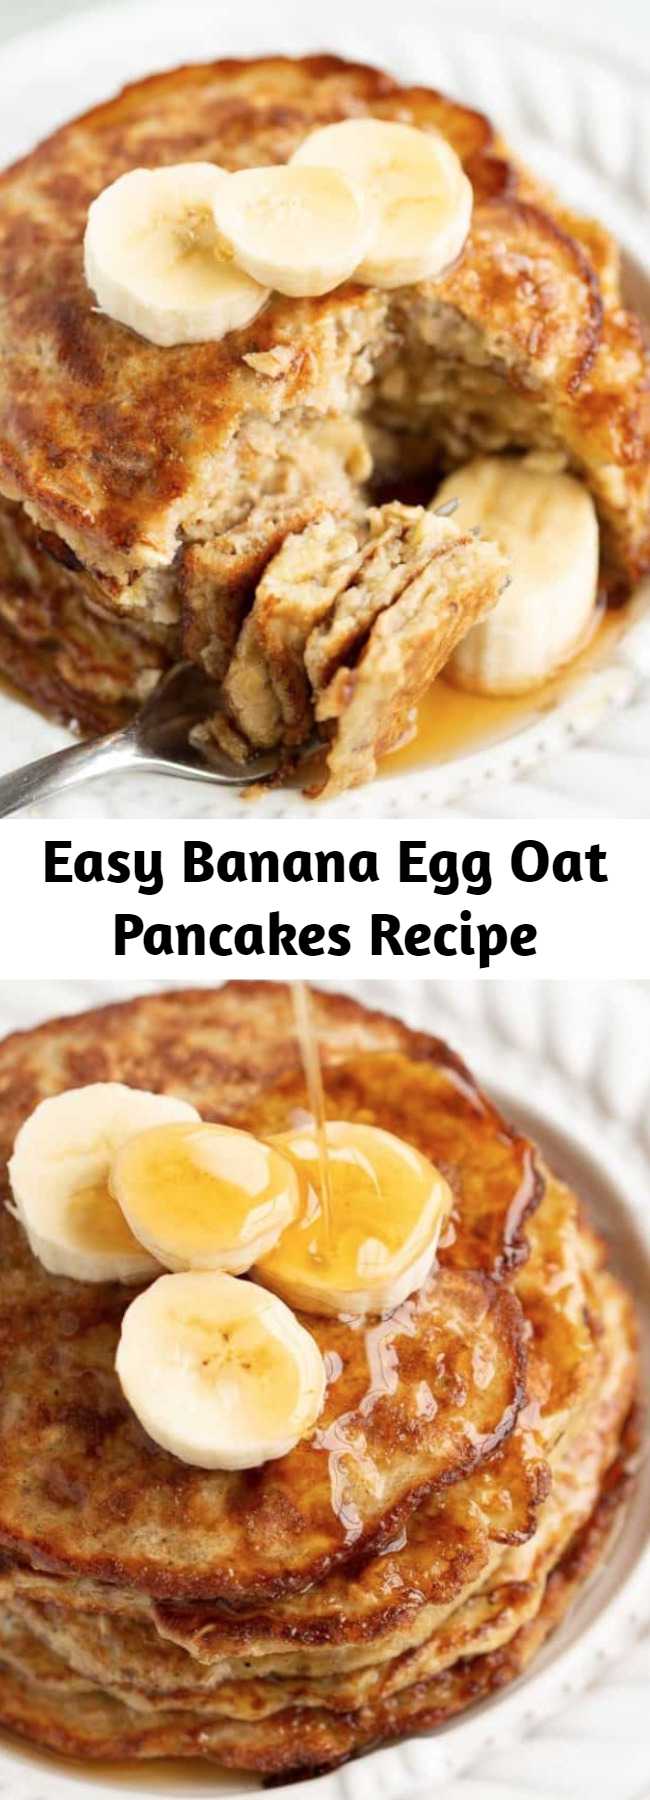 Easy Banana Egg Oat Pancakes Recipe - You only need 3-ingredients (banana, eggs and oats) to make these healthy, delicious pancakes. EASY, kid-friendly and perfect for using up bananas. Add a spoonful of peanut butter and a pinch of cinnamon to take these to the next level! #bananapancakes #bananaeggpancakes #healthypancakes #glutenfreepancakes